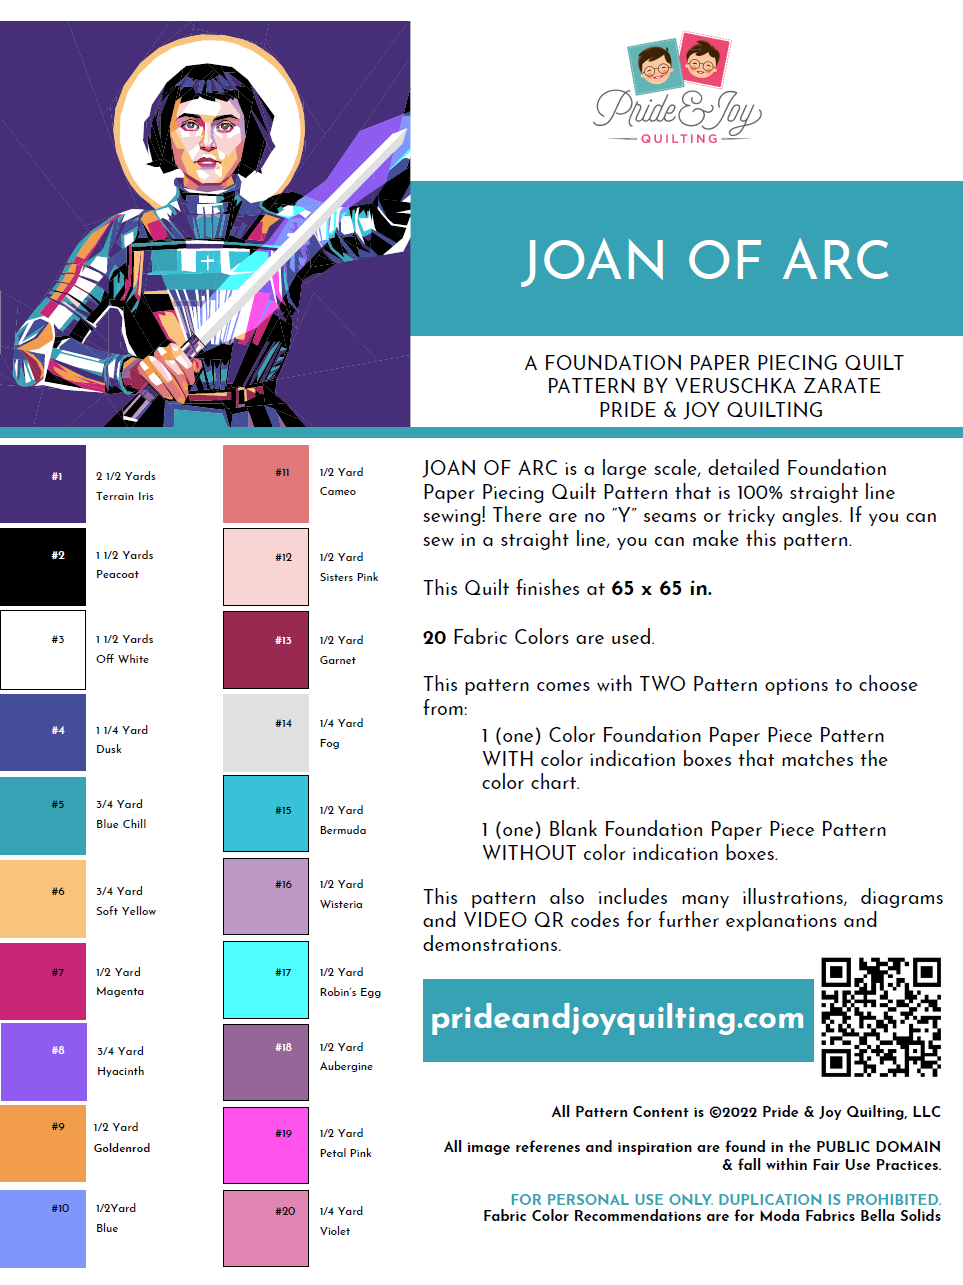 Quilt Kit: Joan of Arc a Foundation Paper Piecing Quilt